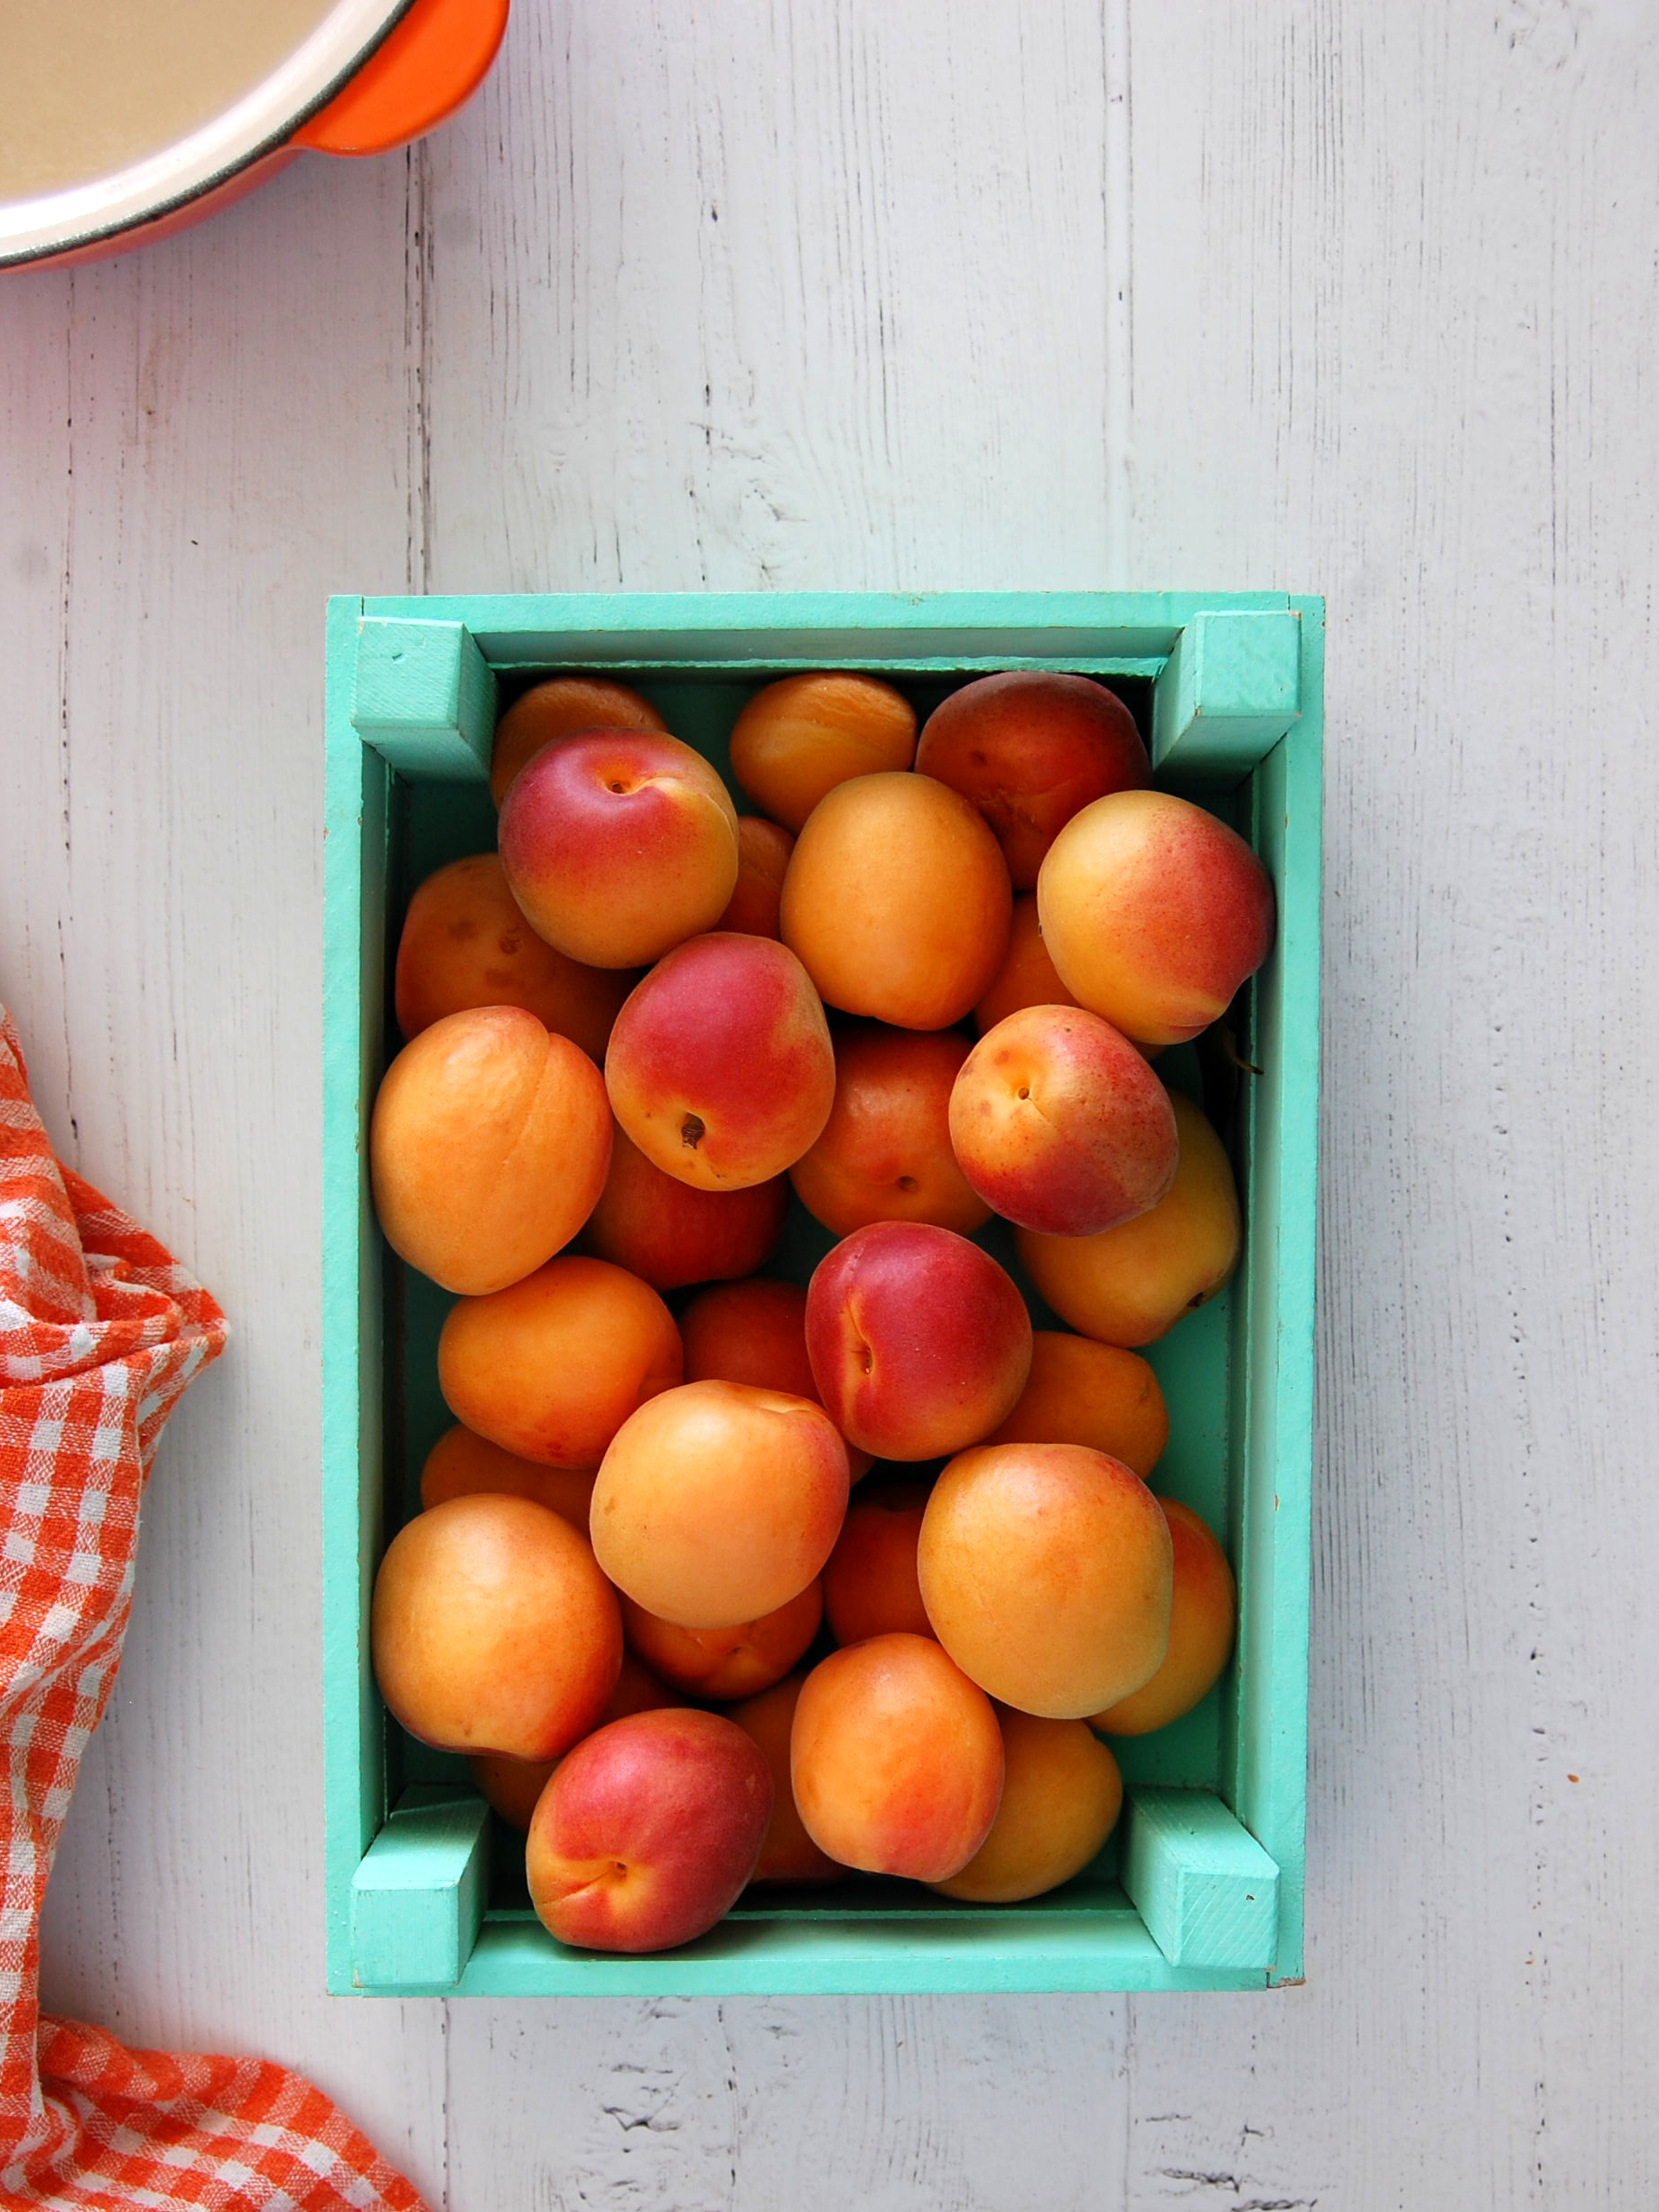 Tourquoise green crate holding fresh apricots. Top left cast iron orange saucepan on a wooden background